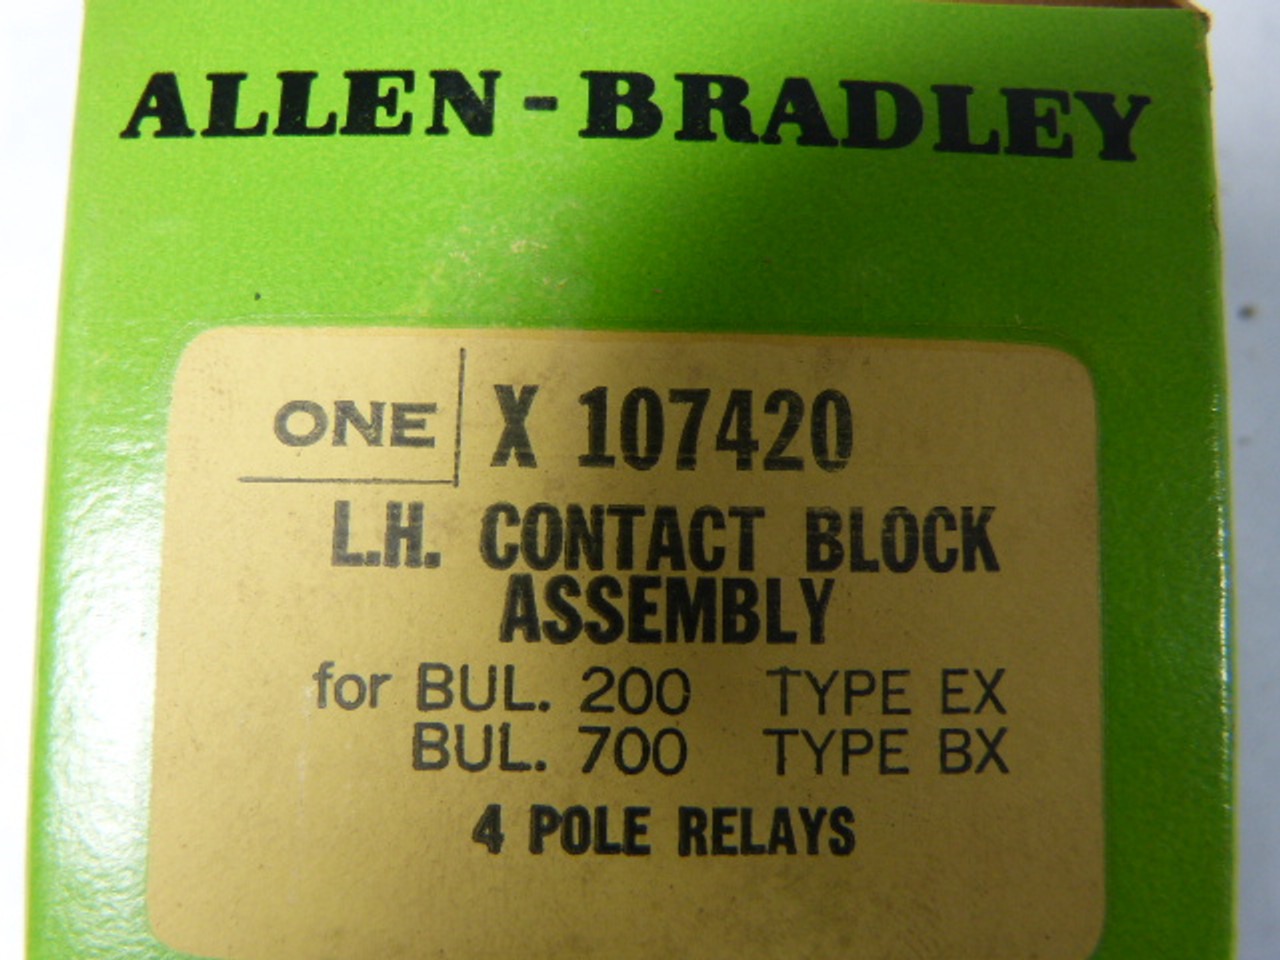 Allen-Bradley X107420 Contact Block Assembly For 4 Pole Relay Left Hand ! NEW !